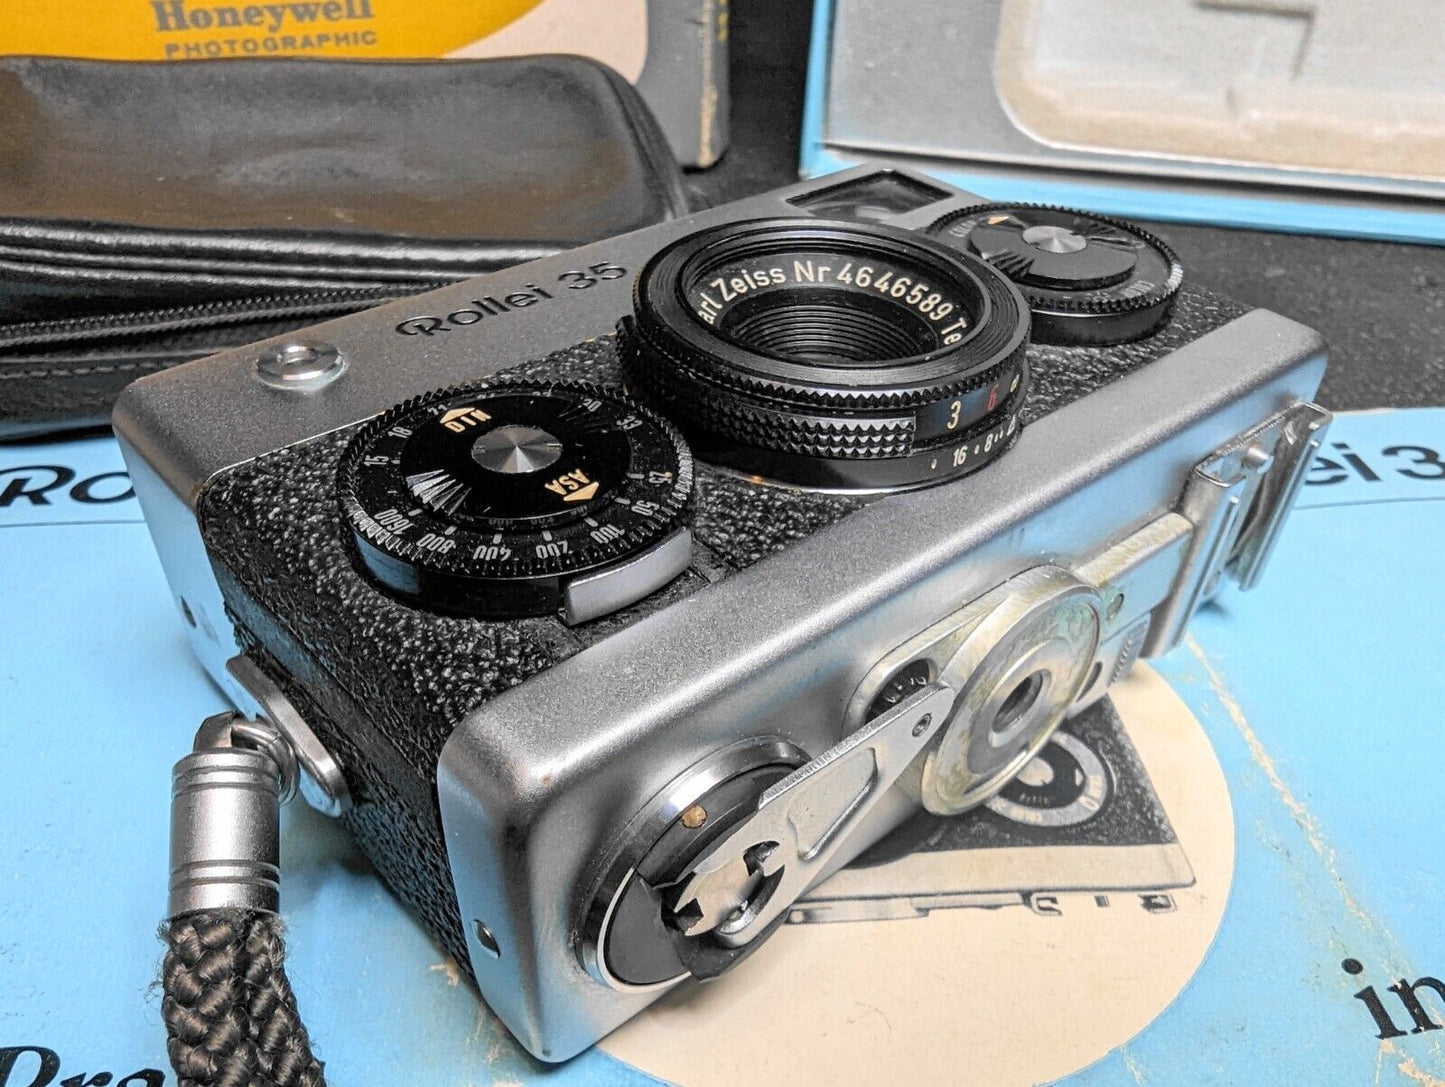 Rollei 35 Germany with 40mm f3.5 Tessar Lens - Box, Leather Pouch, Batt & Manual